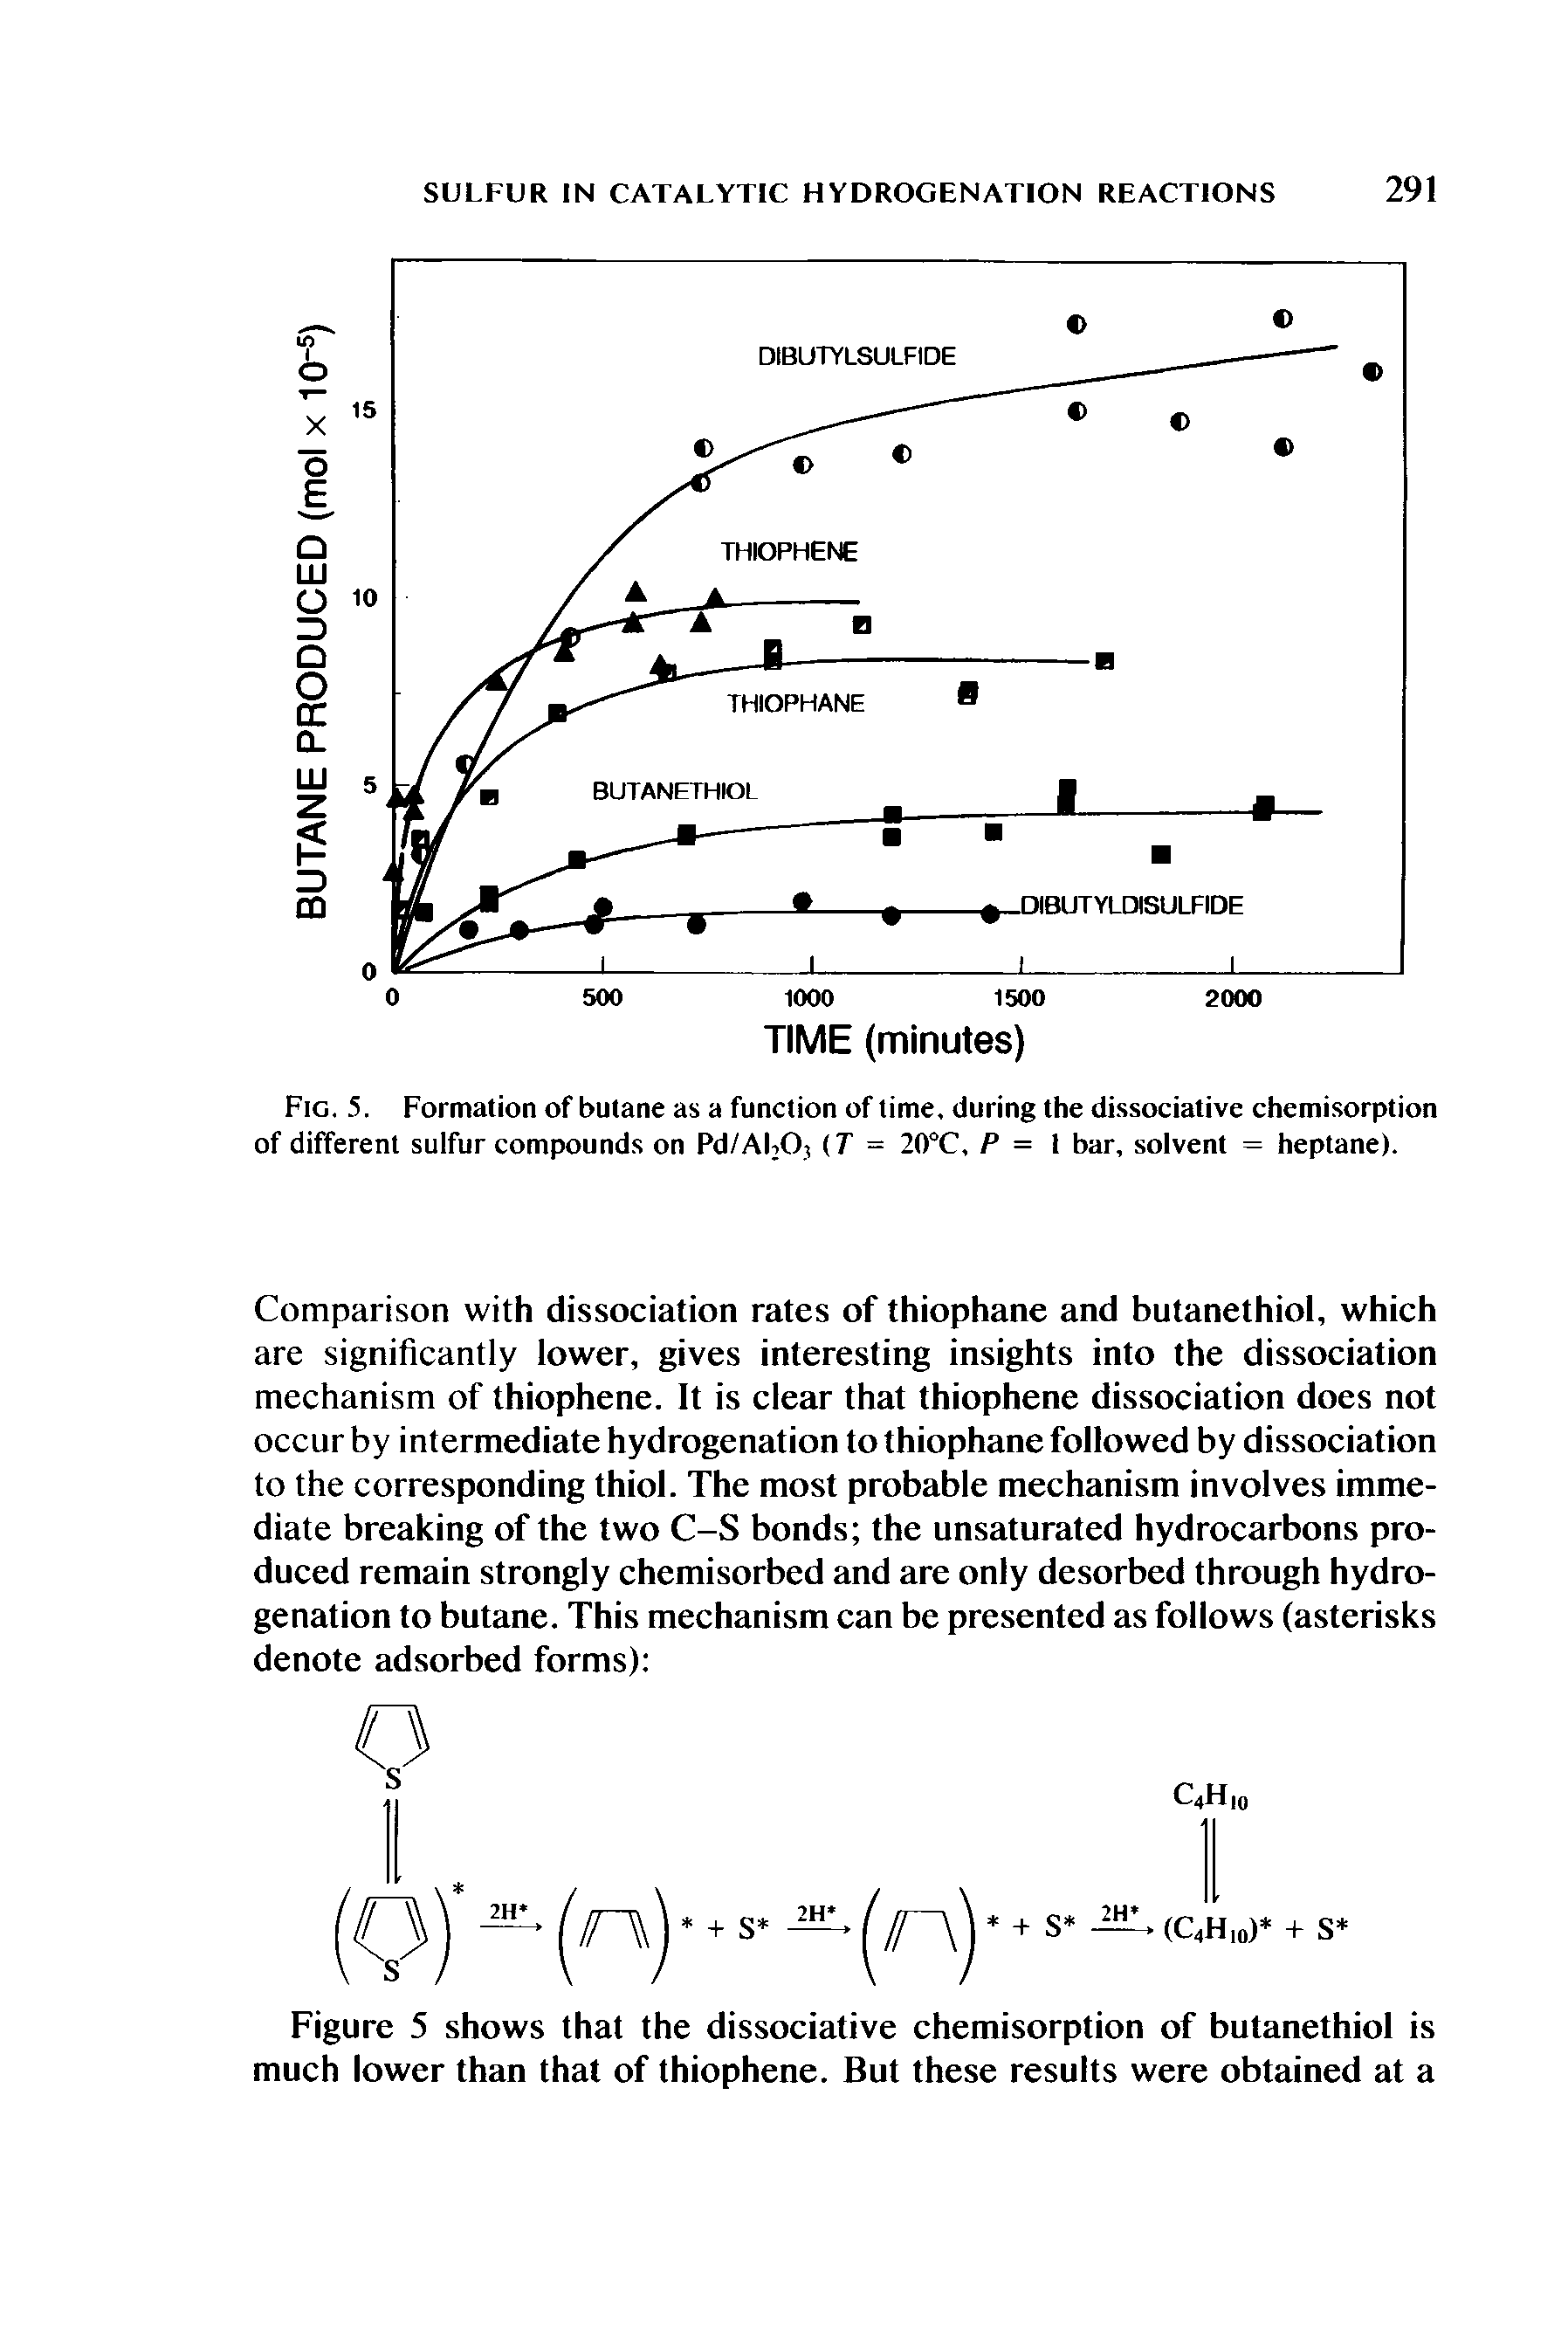 Fig. 5. Formation of butane as a function of time, during the dissociative chemisorption of different sulfur compounds on Pd/ALOj (T = 20°C, P = I bar, solvent = heptane).